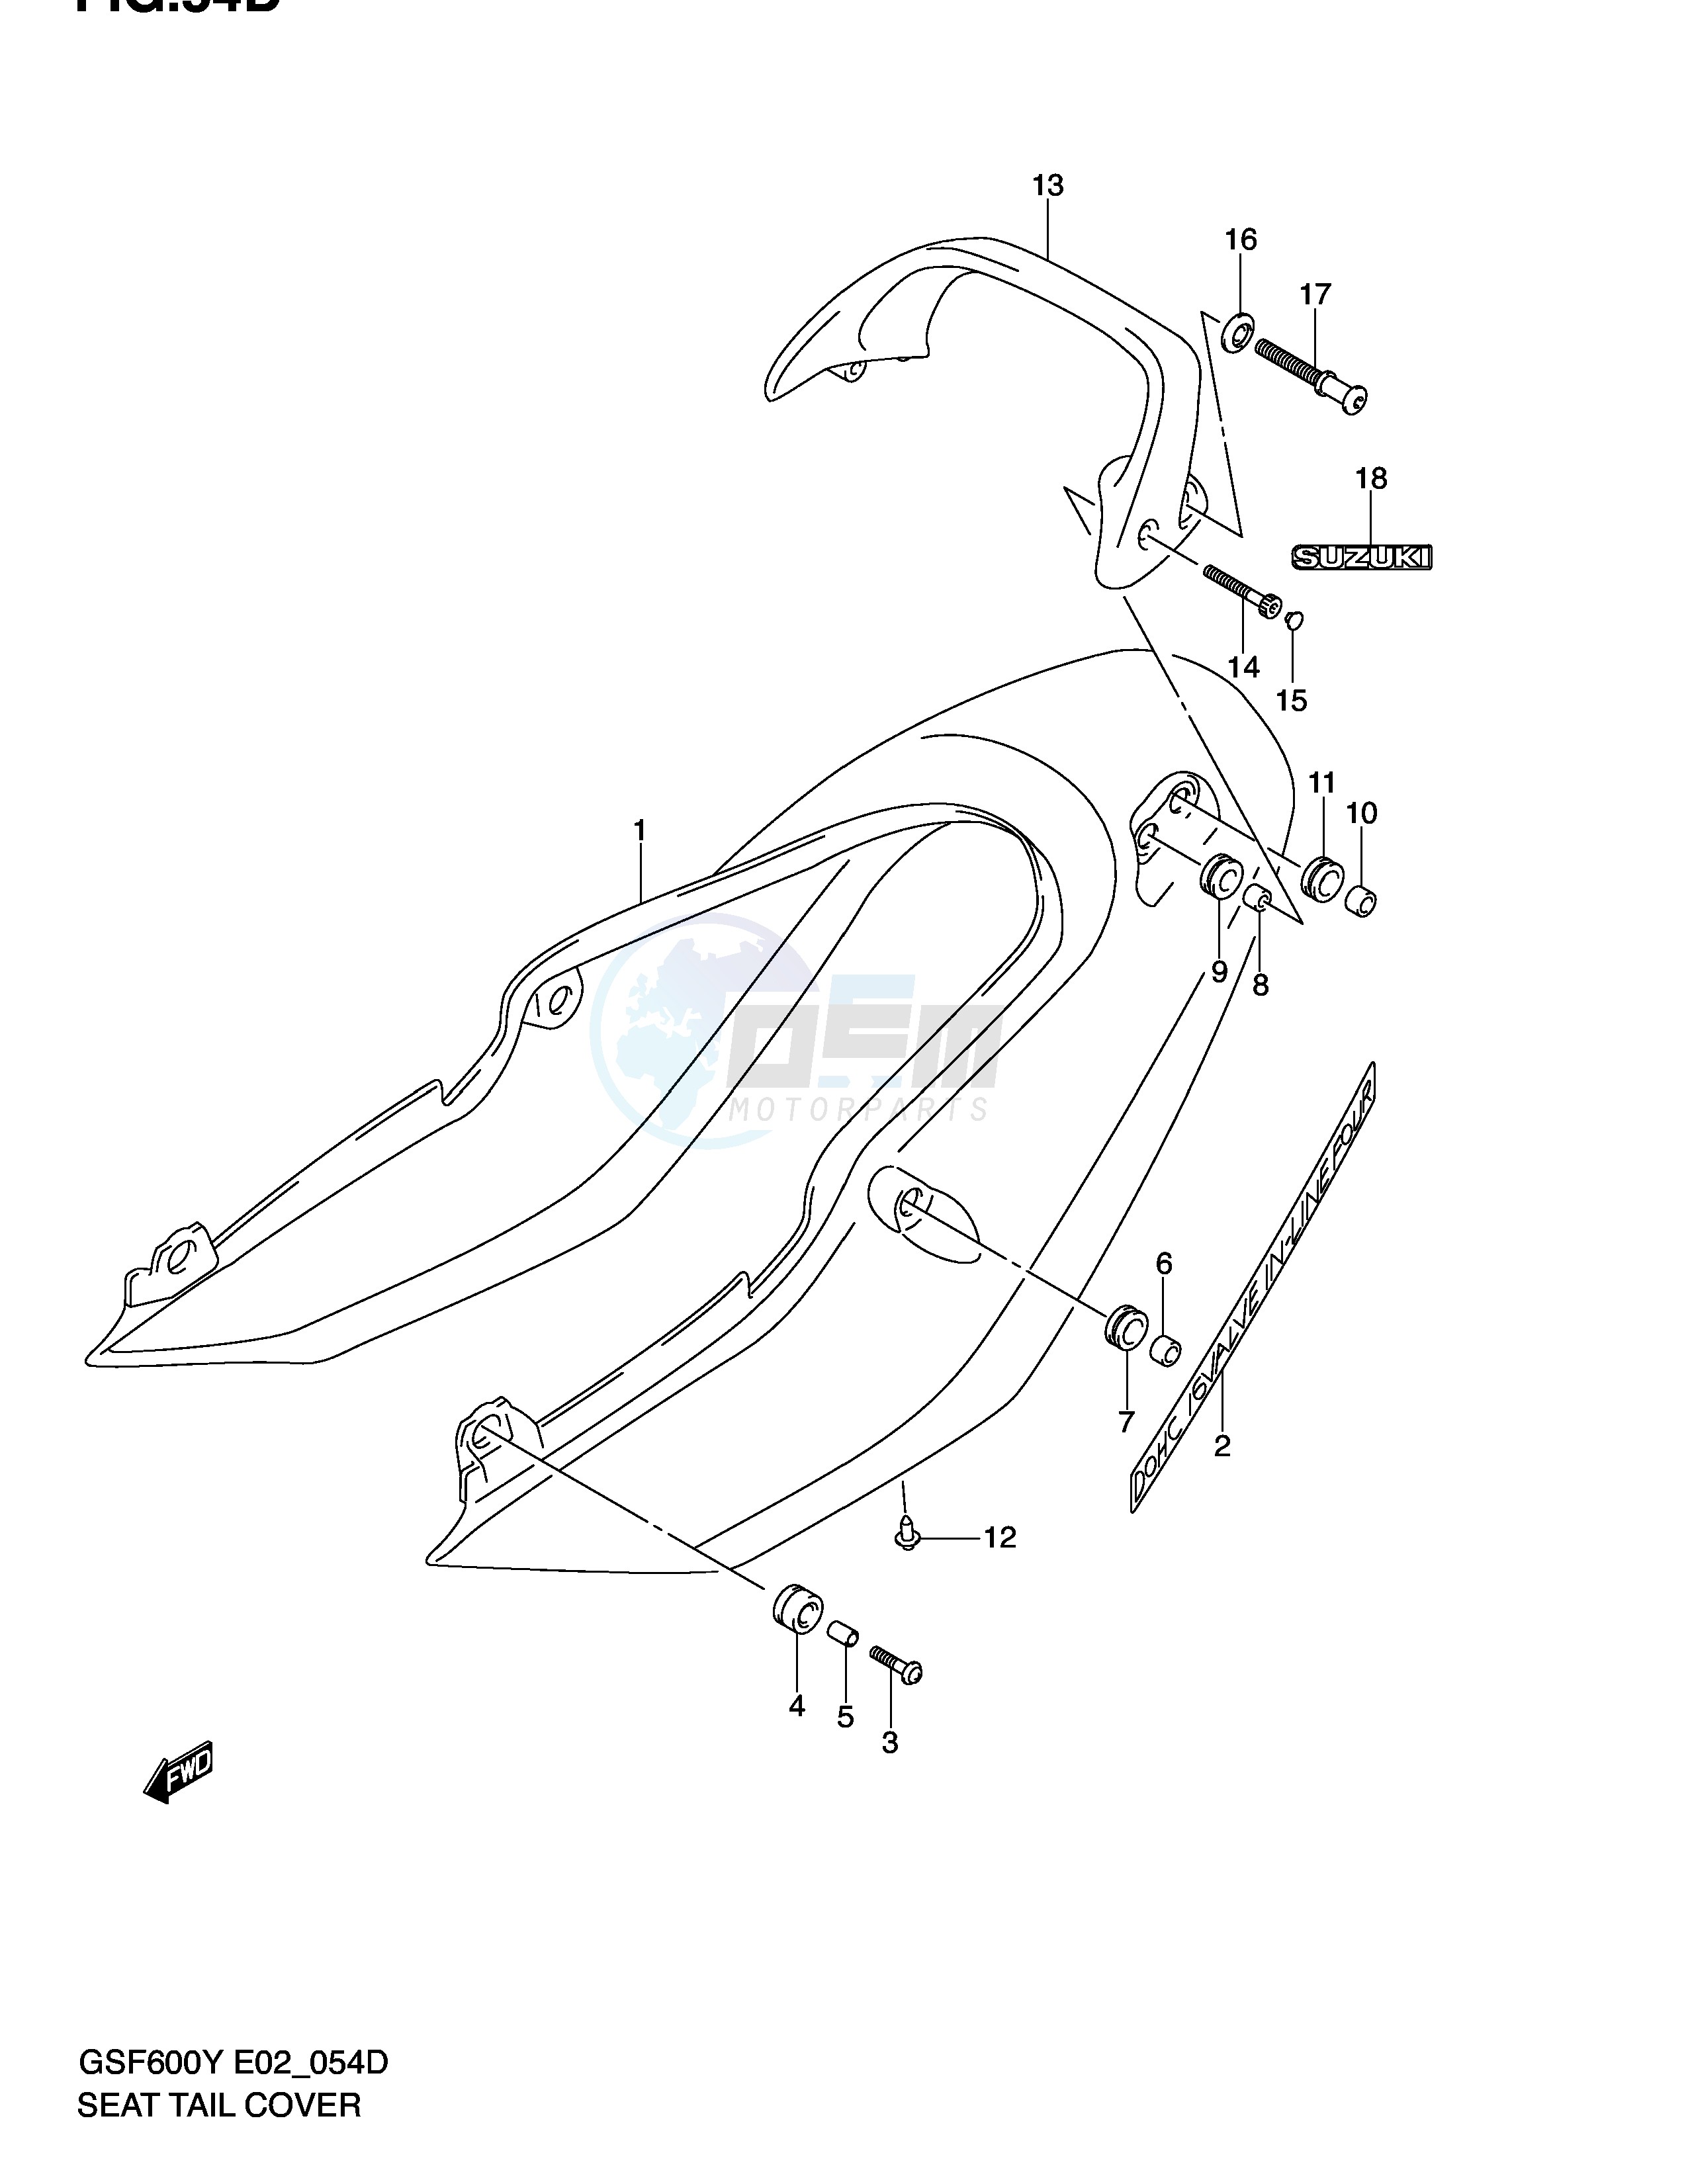 SEAT TAIL COVER (GSF600SK2 SUK2) blueprint